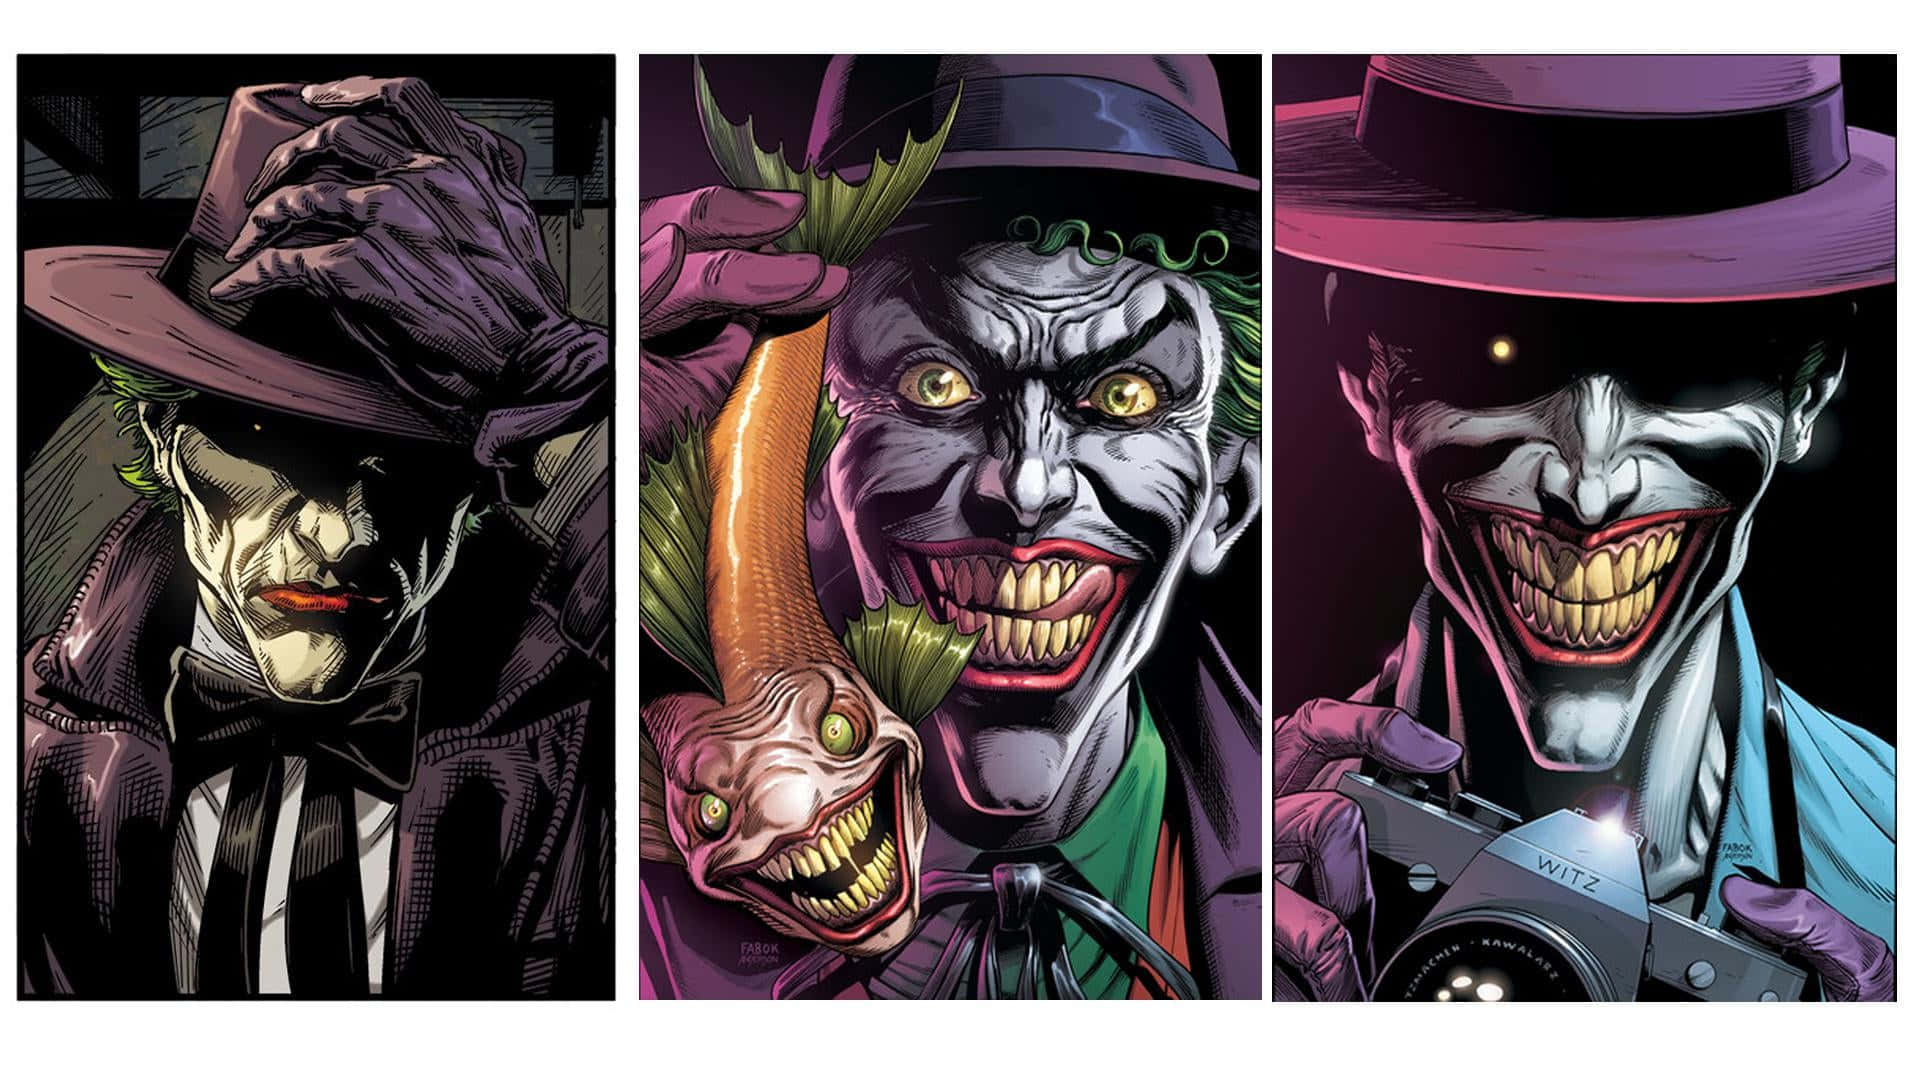 Batman and The Three Jokers face off in a striking illustration Wallpaper